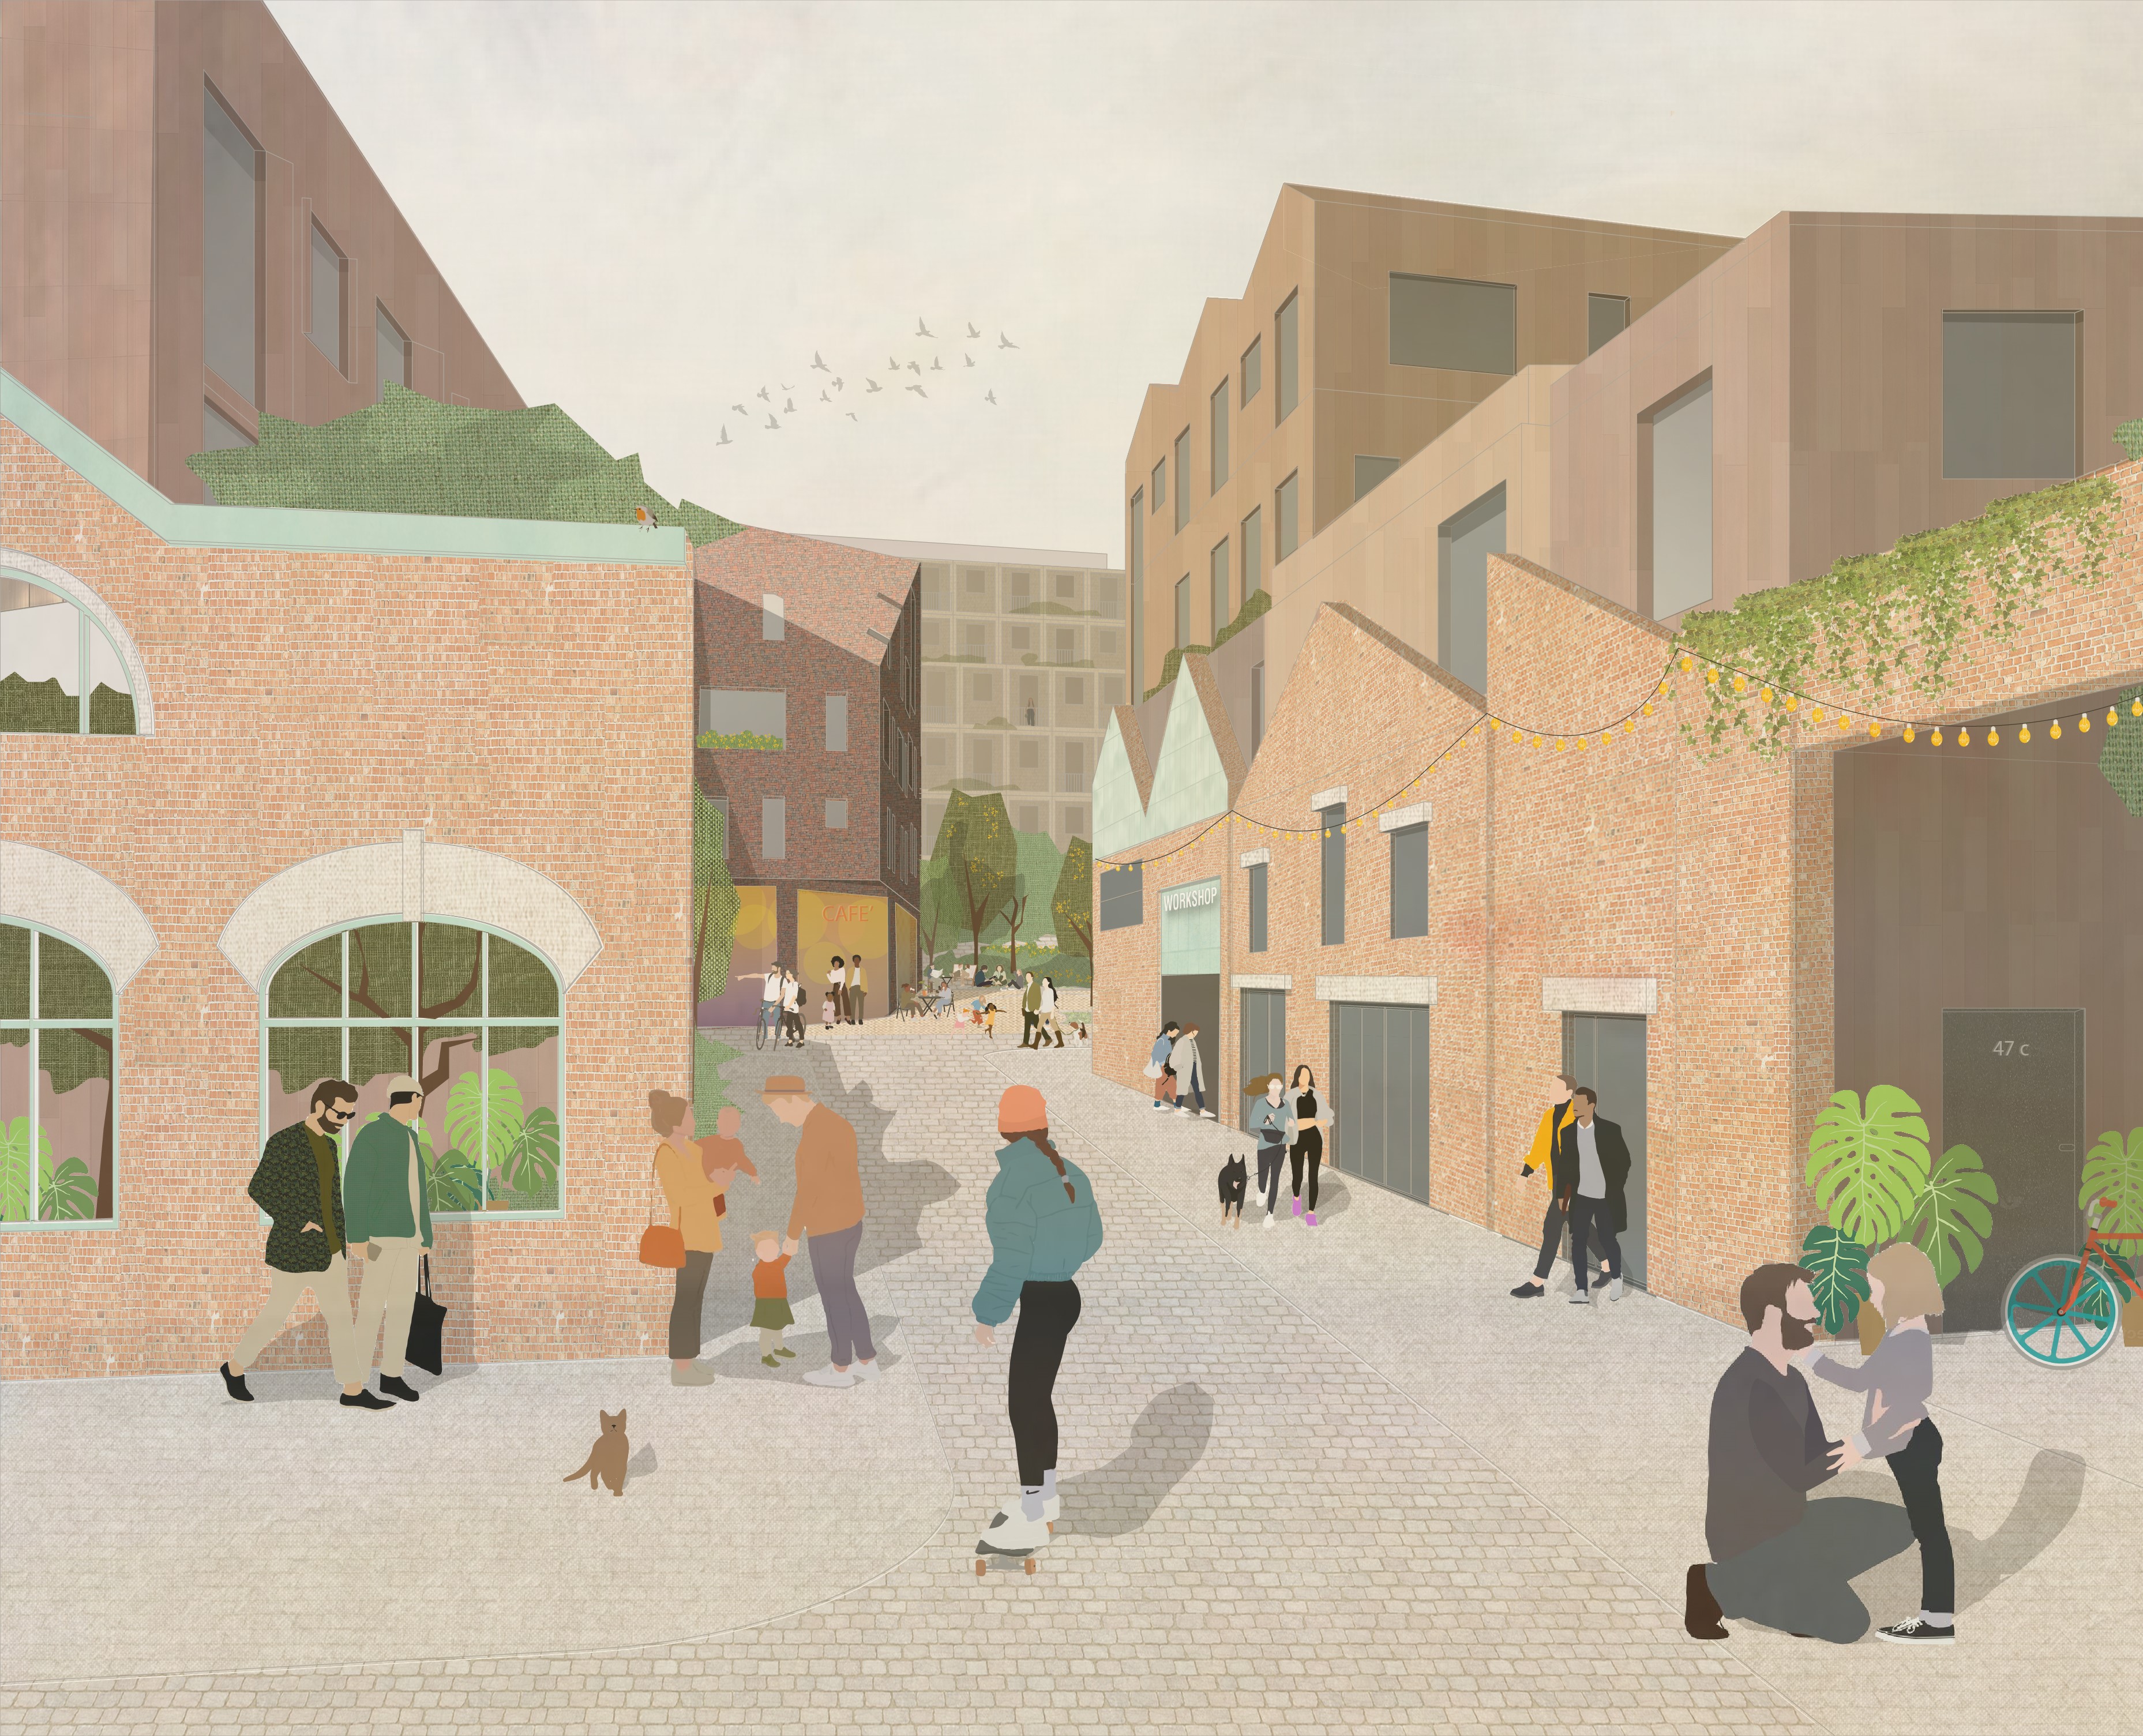 An artist impression of what the Neepsend development will look like after redevelopment.